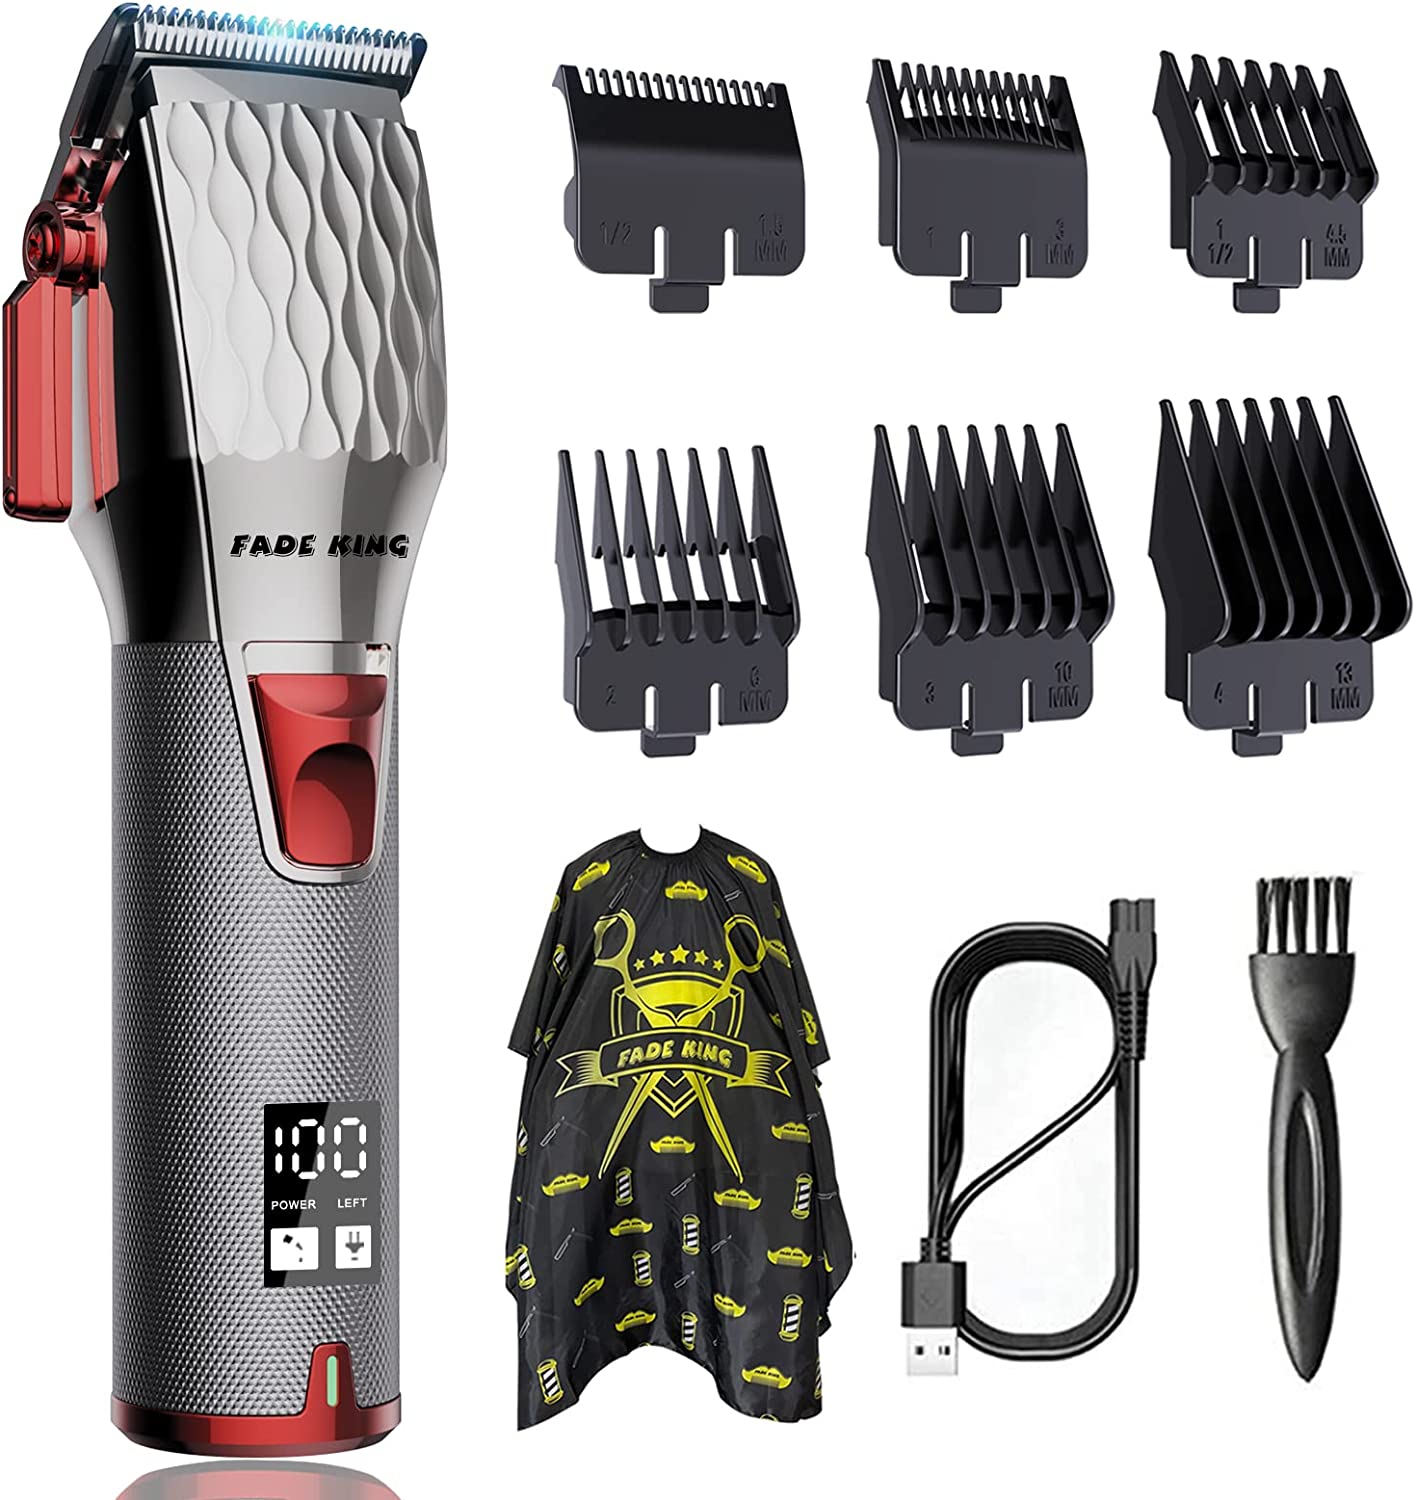 Hair Clippers for Men, Electric Hair Clipper Hair Trimmer for Men Rechargeable Electric Shaver Beard Barber Hair Cutting Machine for Men Hair Cut Co